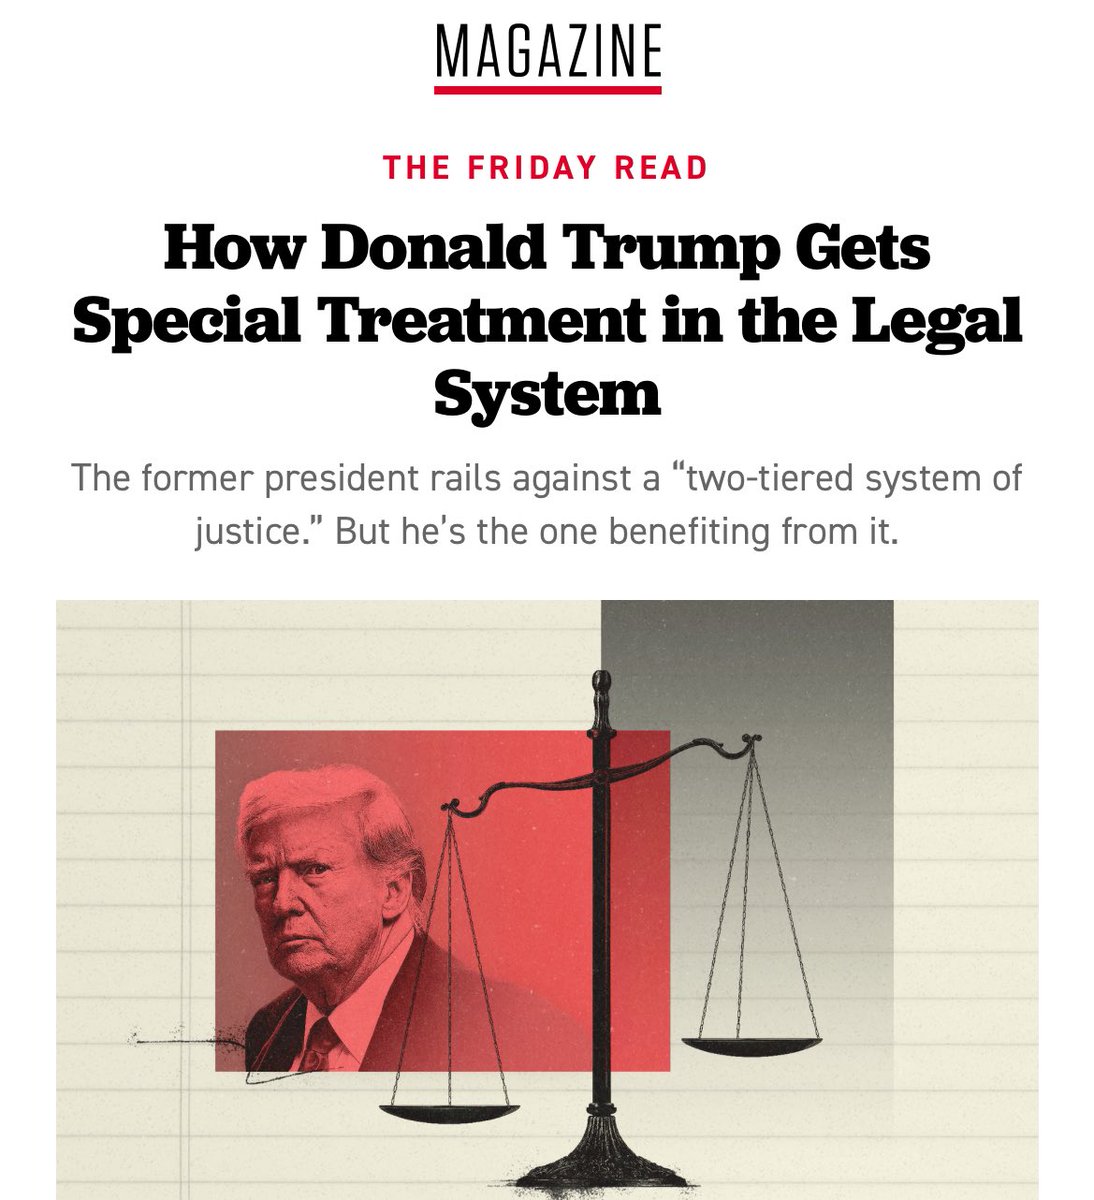 POLITICO: “.. no other person in America — if charged with the diverse panoply of malfeasance that Trump has been accused of — would enjoy the same procedural and structural advantages that Trump has harnessed, to great effect ..” @POLITICOMag politico.com/news/magazine/…